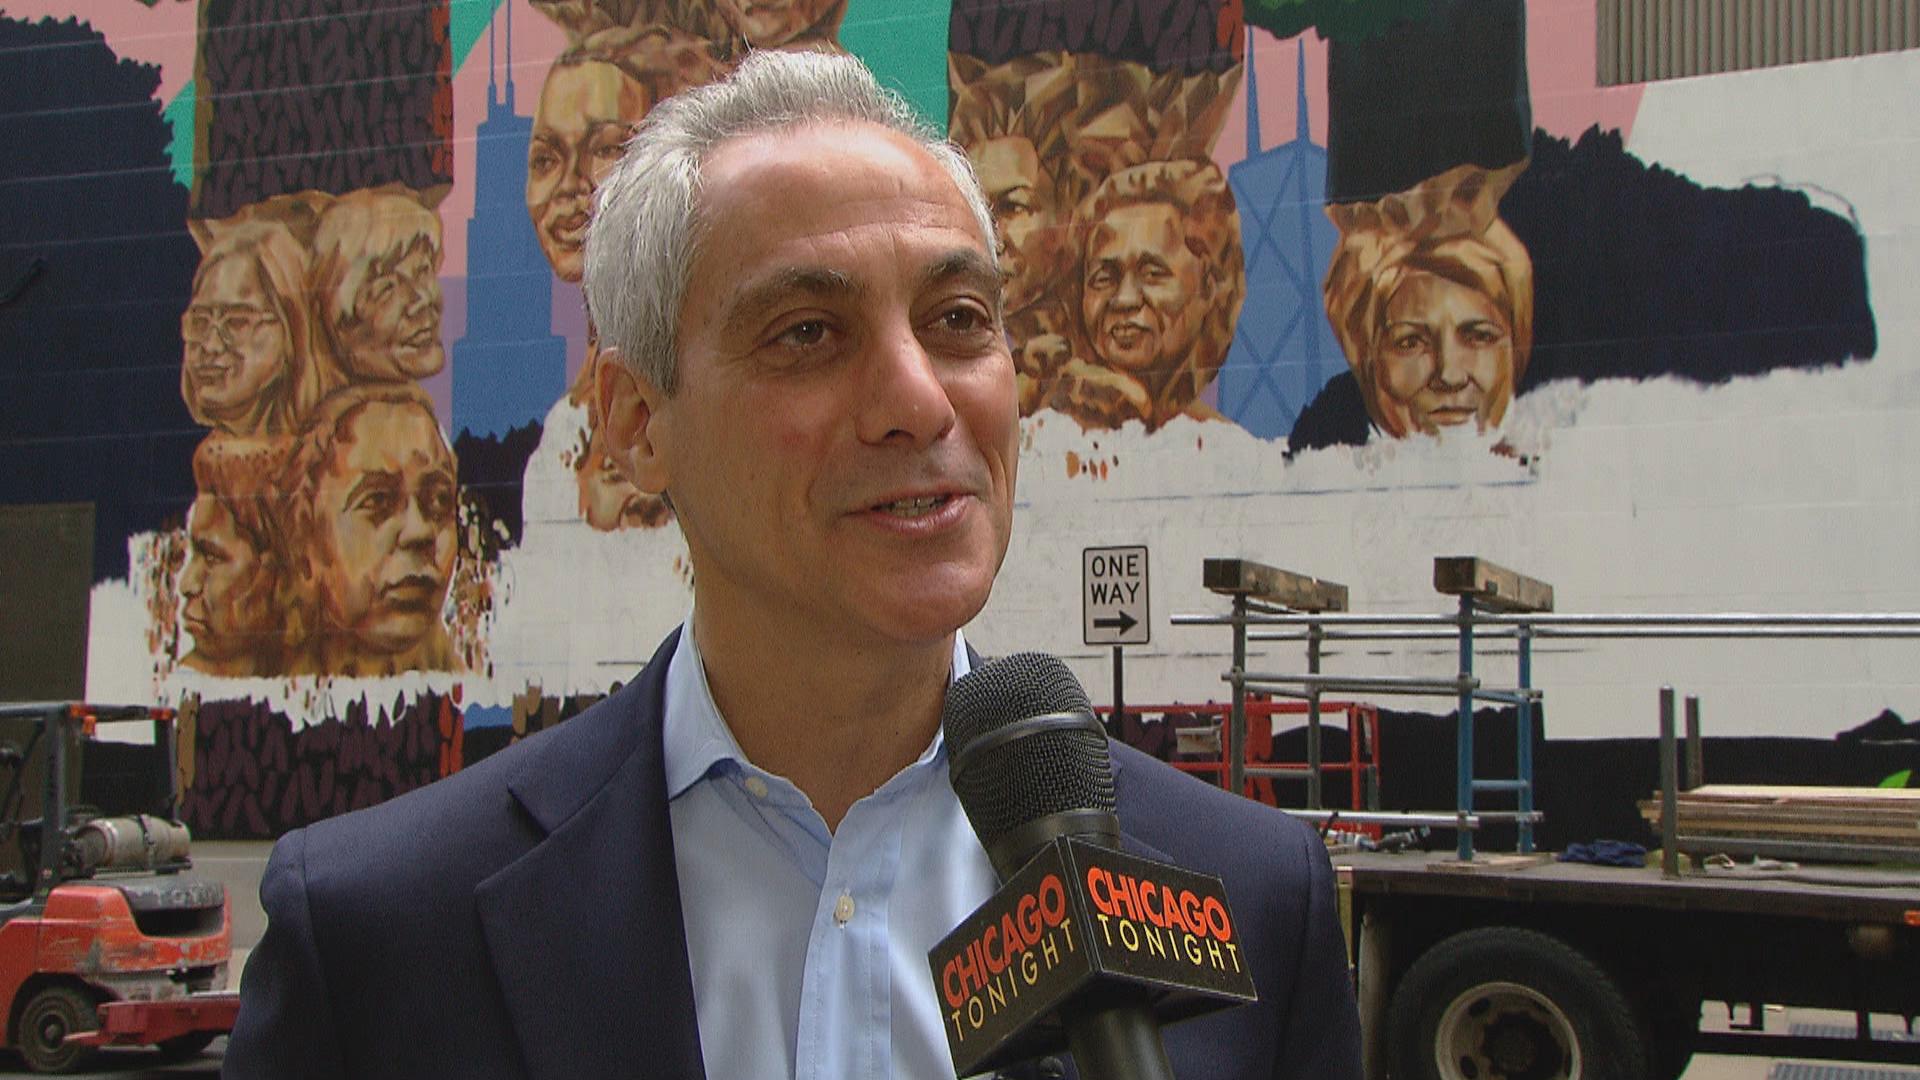 Rahm Emanuel at the mural. Photo: Chicago Tonight